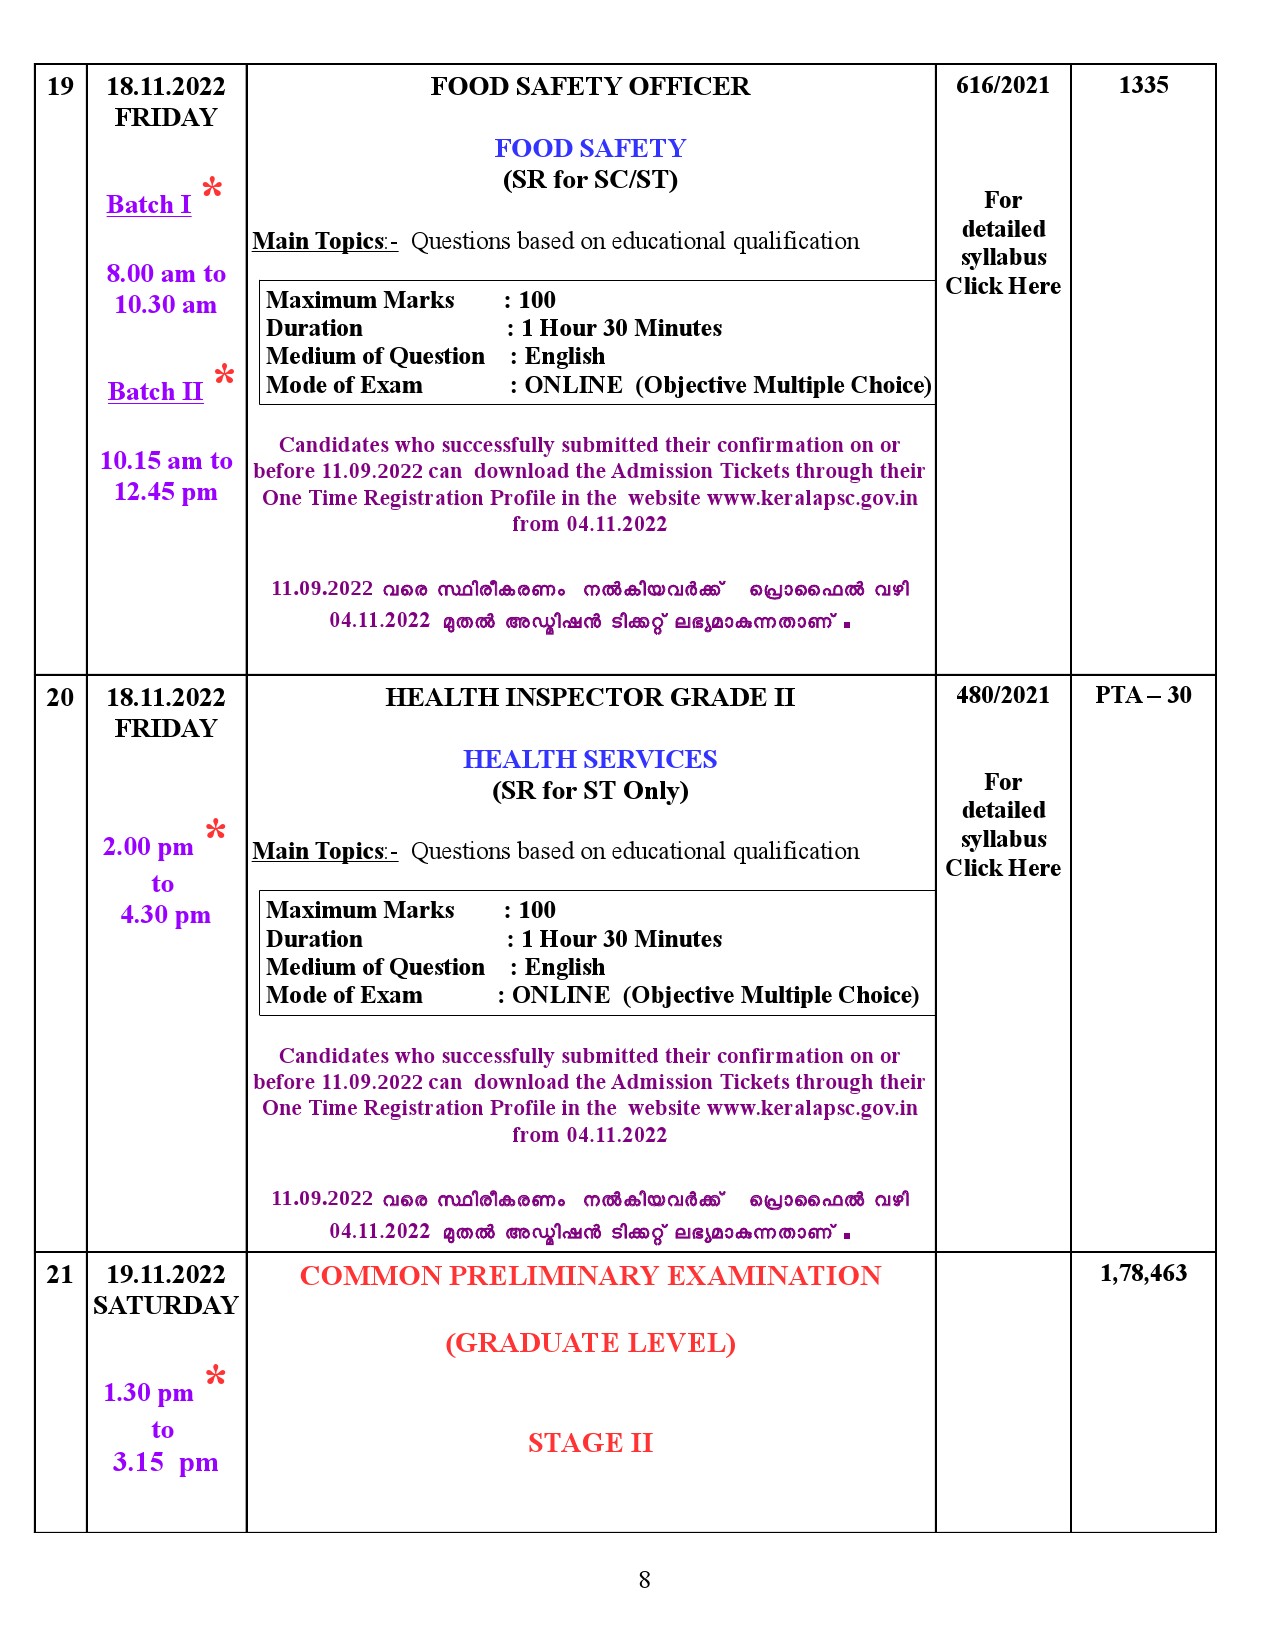 EXAMINATION PROGRAMME FOR THE MONTH OF NOVEMBER 2022 AFTER CONFIRMATION - Notification Image 8